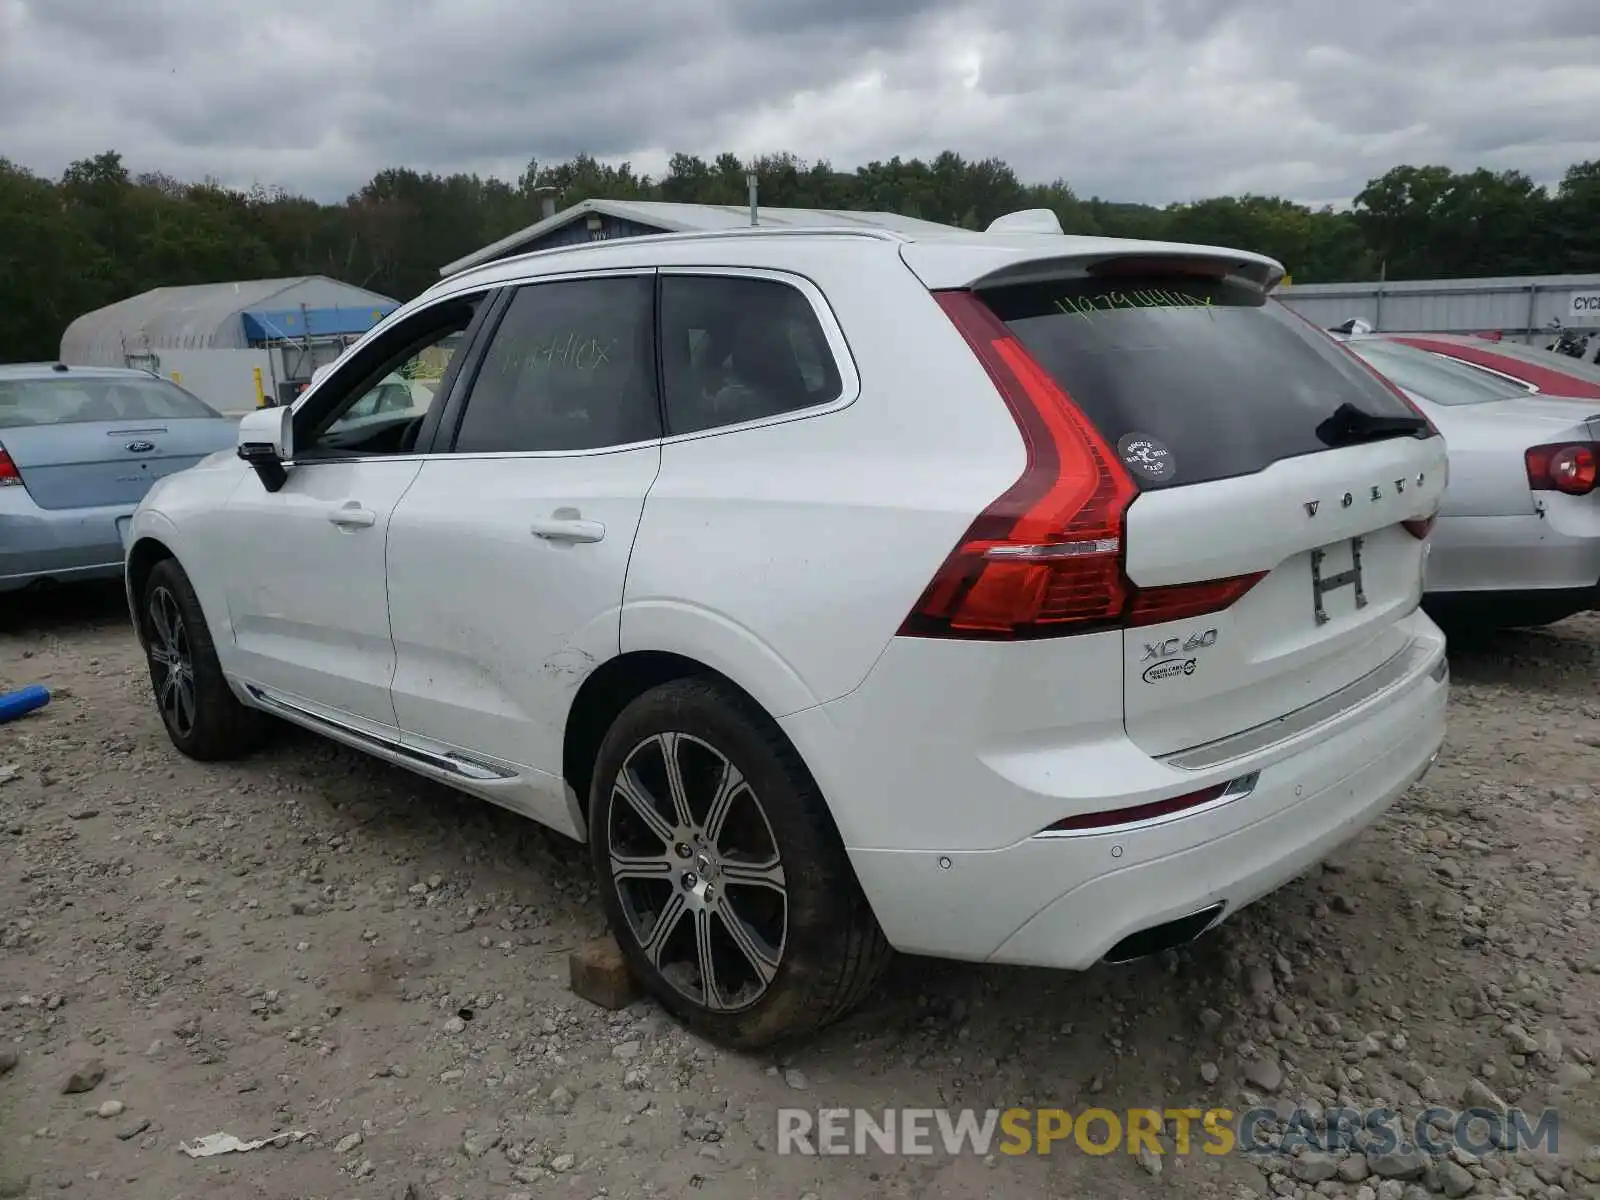 3 Photograph of a damaged car LYVA22RLXKB227757 VOLVO XC60 T6 IN 2019